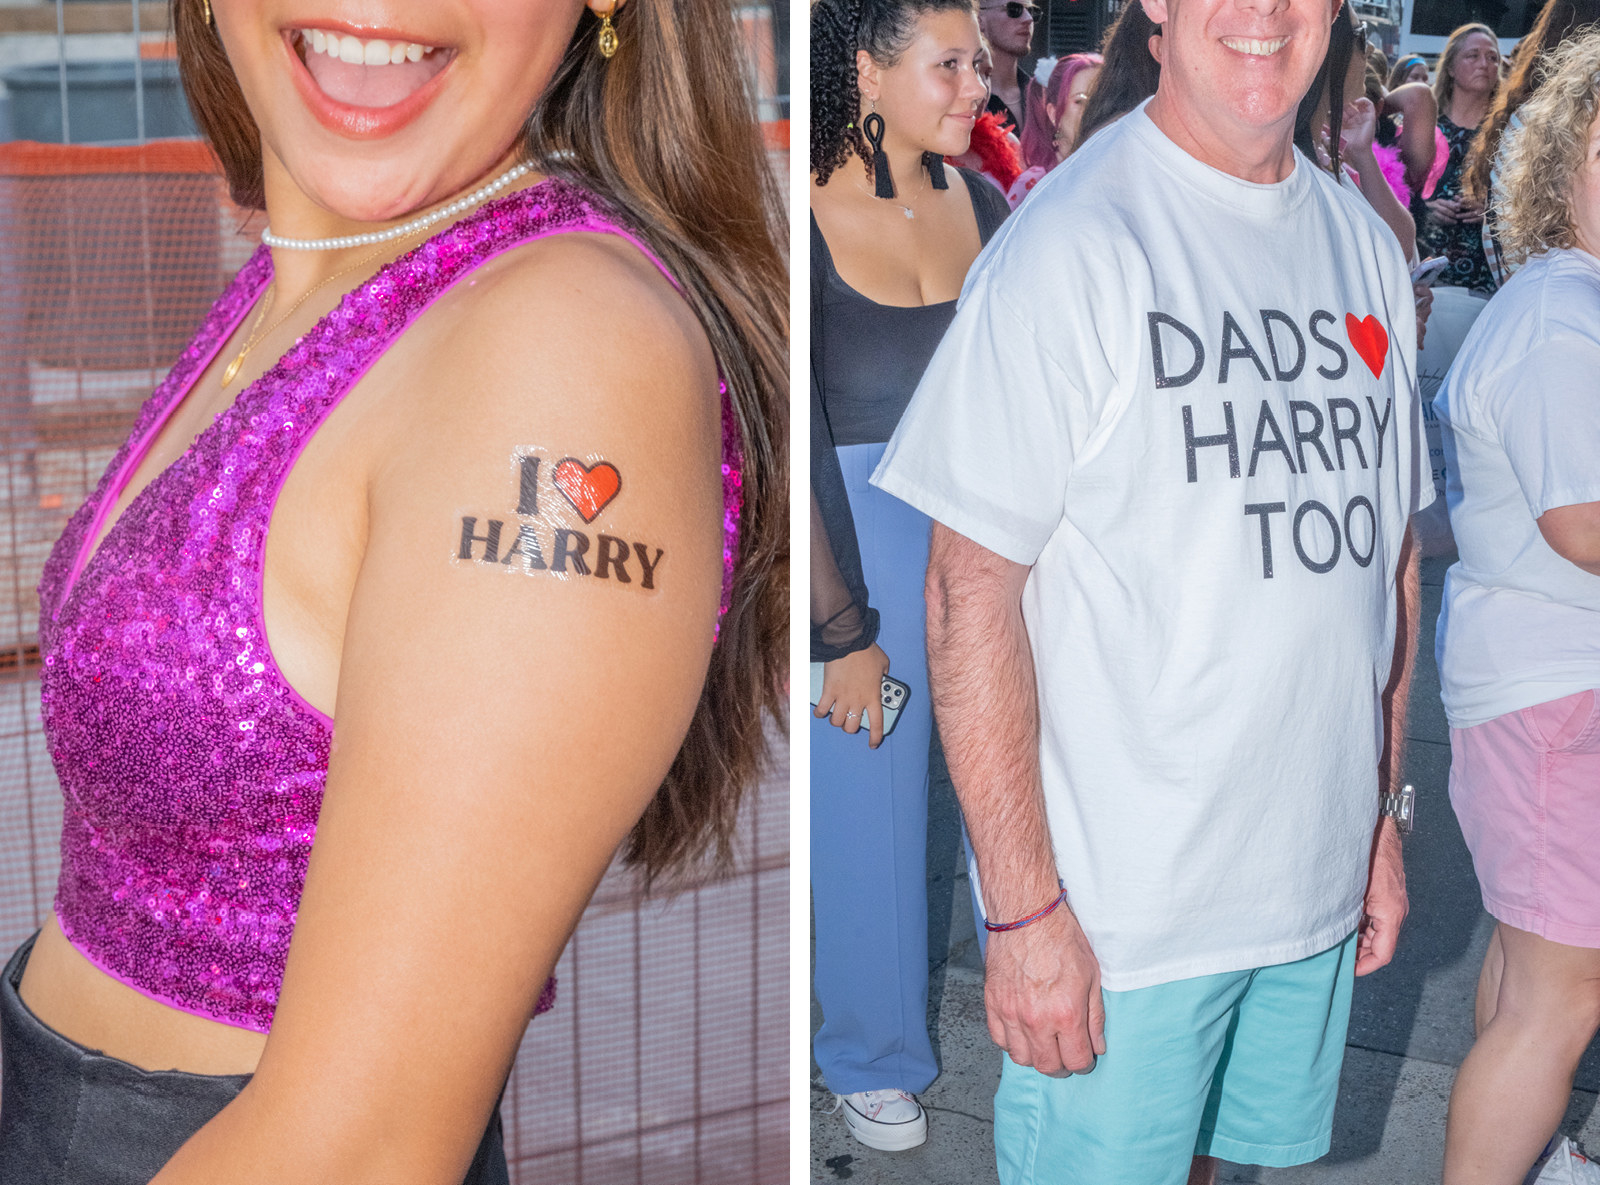 Two images: a woman with a temporary tattoo that reads &quot;I heart Harry,&quot; and a middle-aged man with a shirt that reads &quot;Dads heart Harry too&quot;